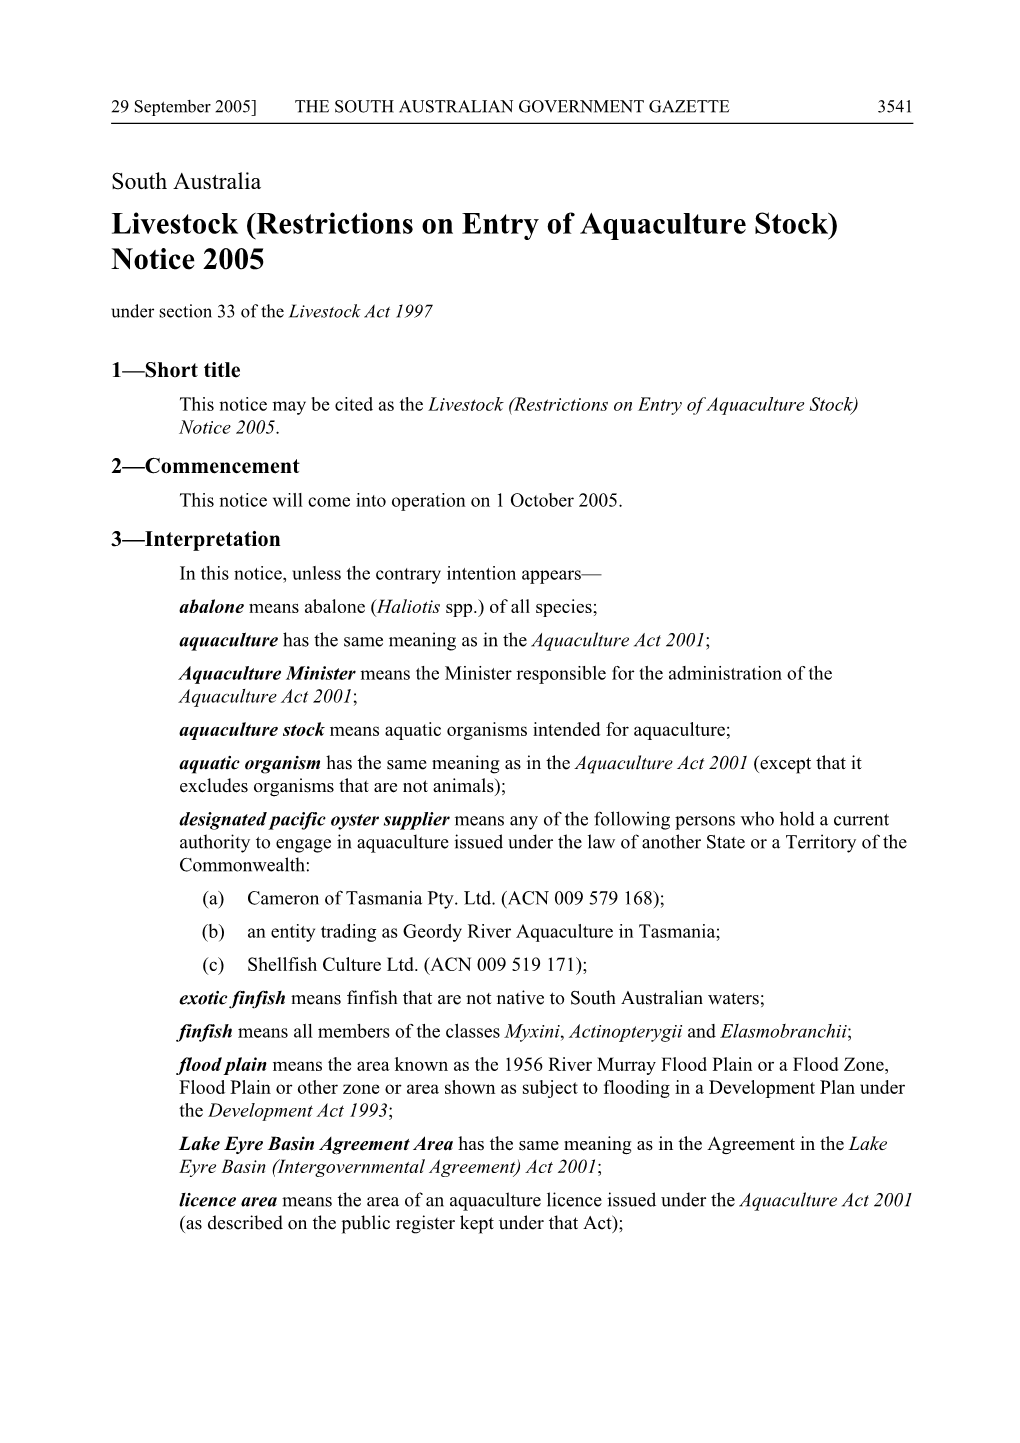 Livestock (Restrictions on Entry of Aquaculture Stock) Notice 2005 Under Section 33 of the Livestock Act 1997